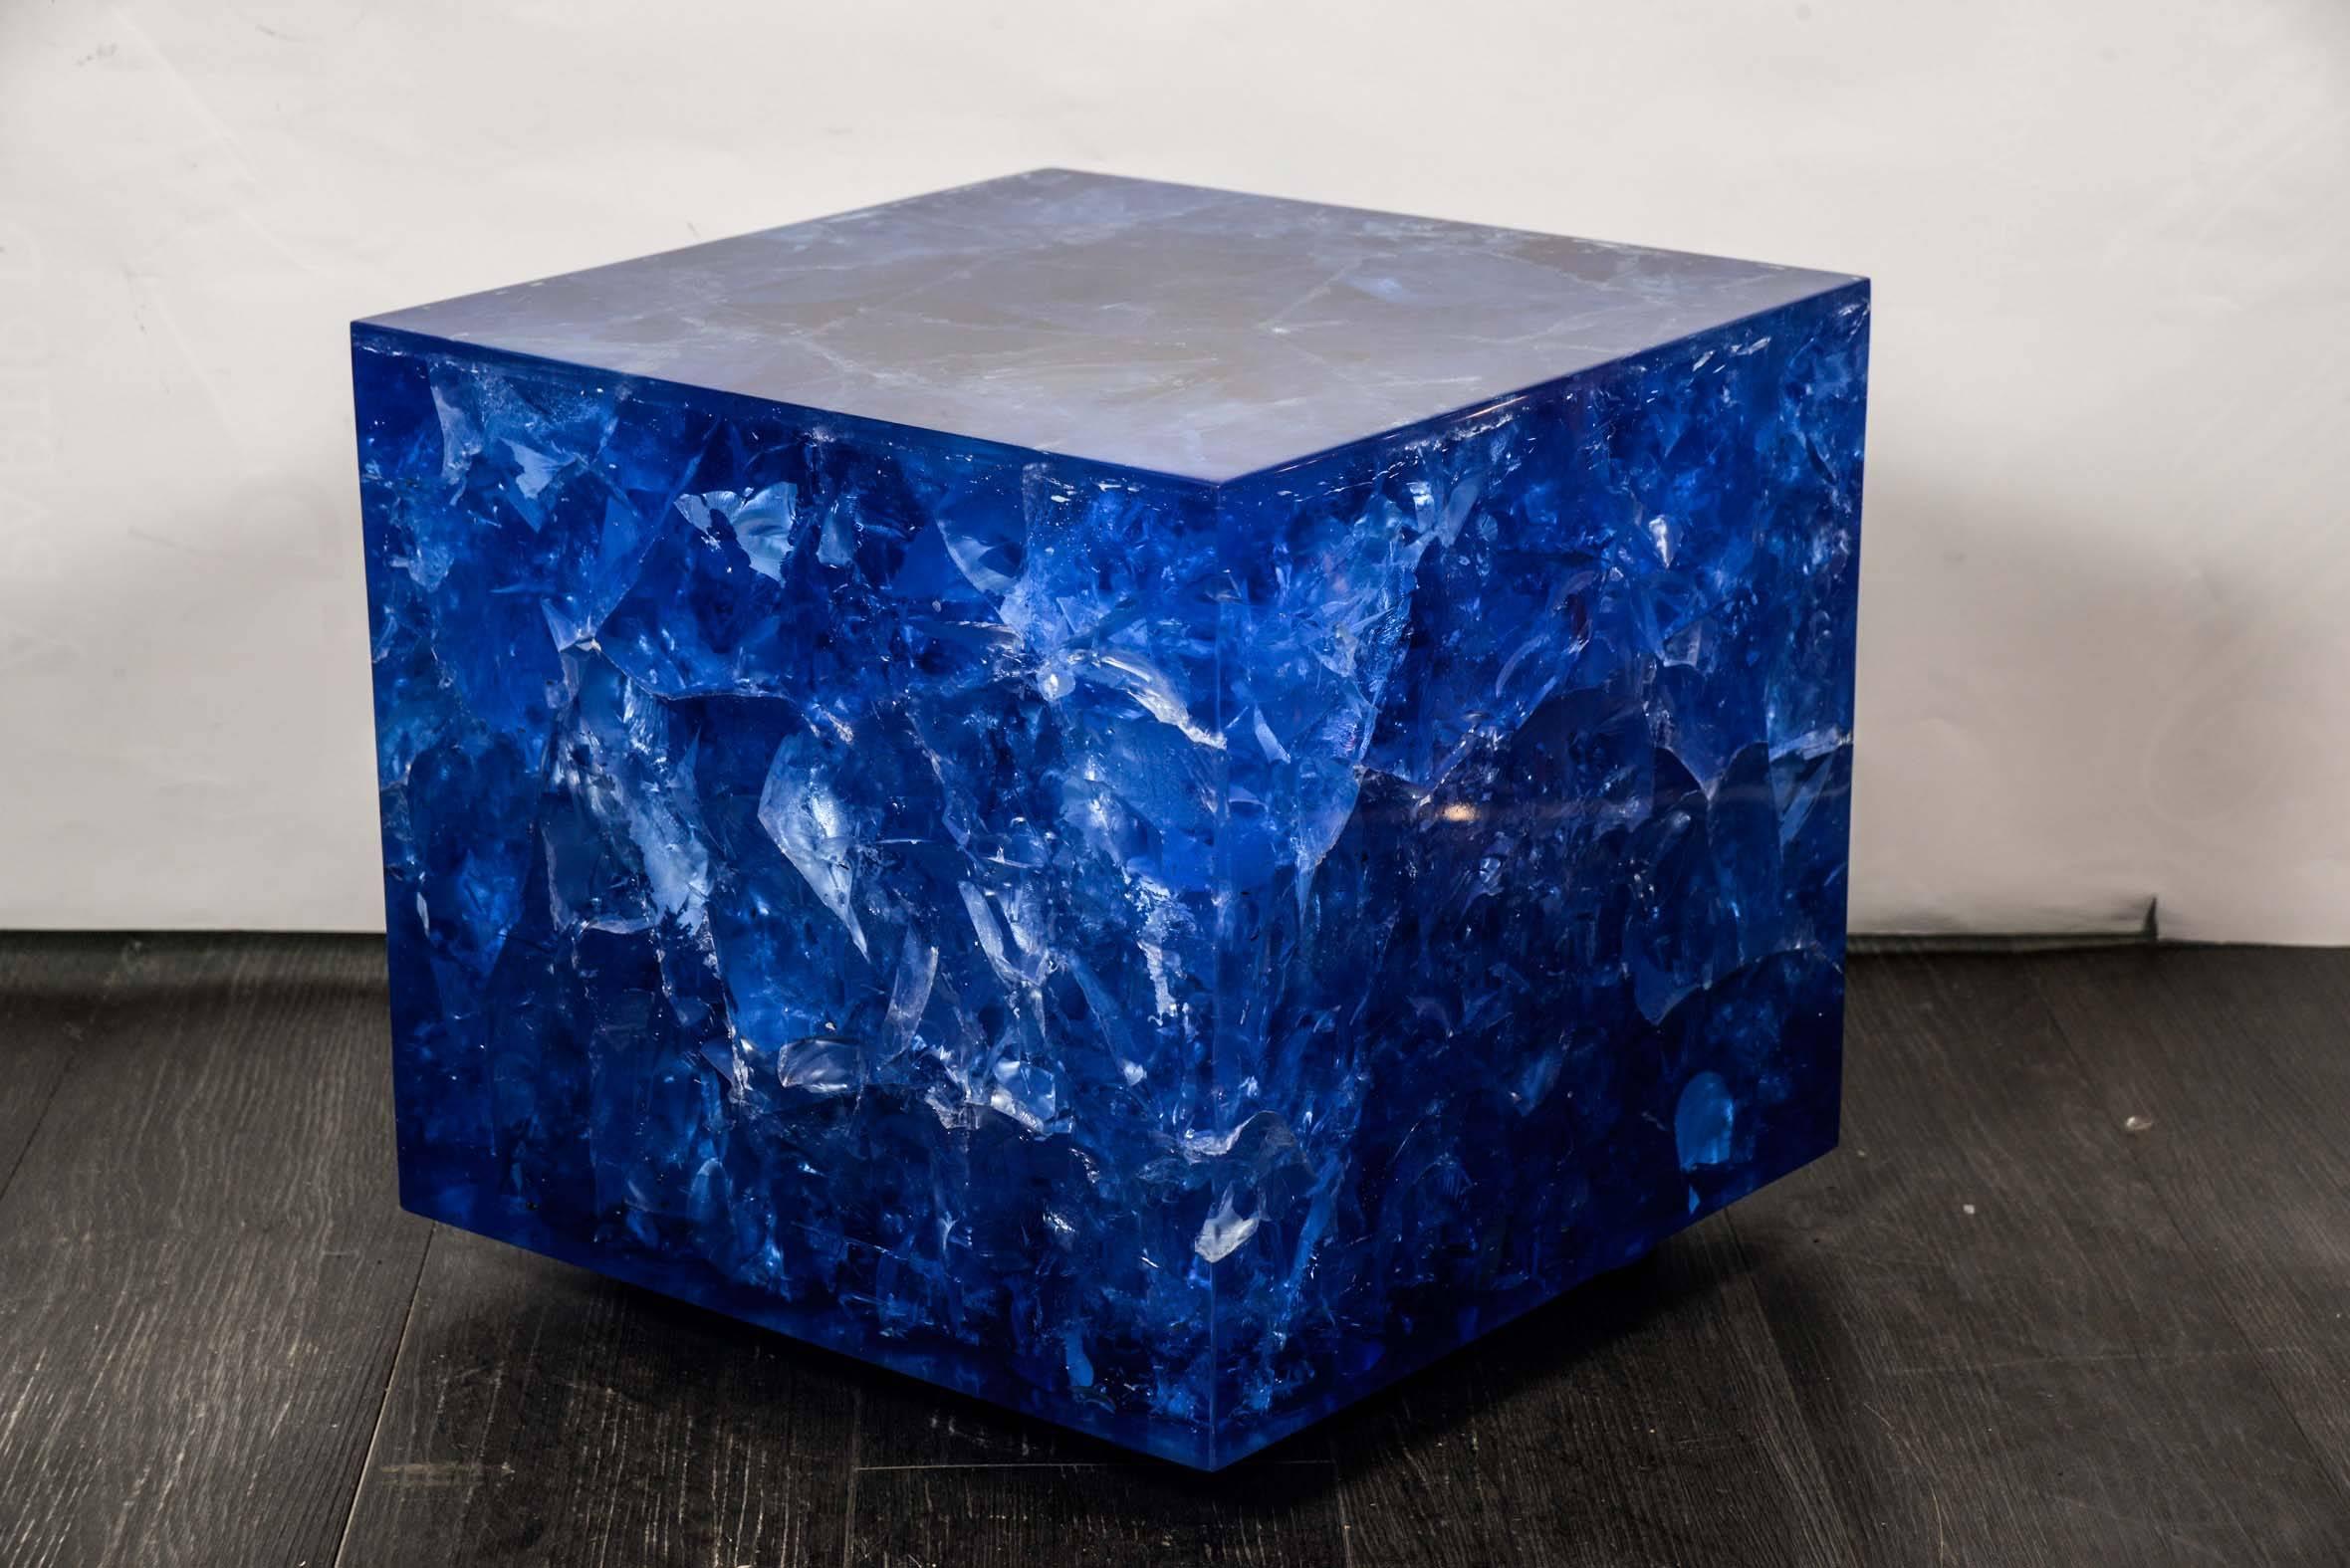 Side tables made with crushed ice resin by Franco Gavagni for Régis Royant Gallery.
Quality is amazing but it's preferable to protect with a glass on.
Weight is 60 kilos each.
Edition of eight pieces on each color.